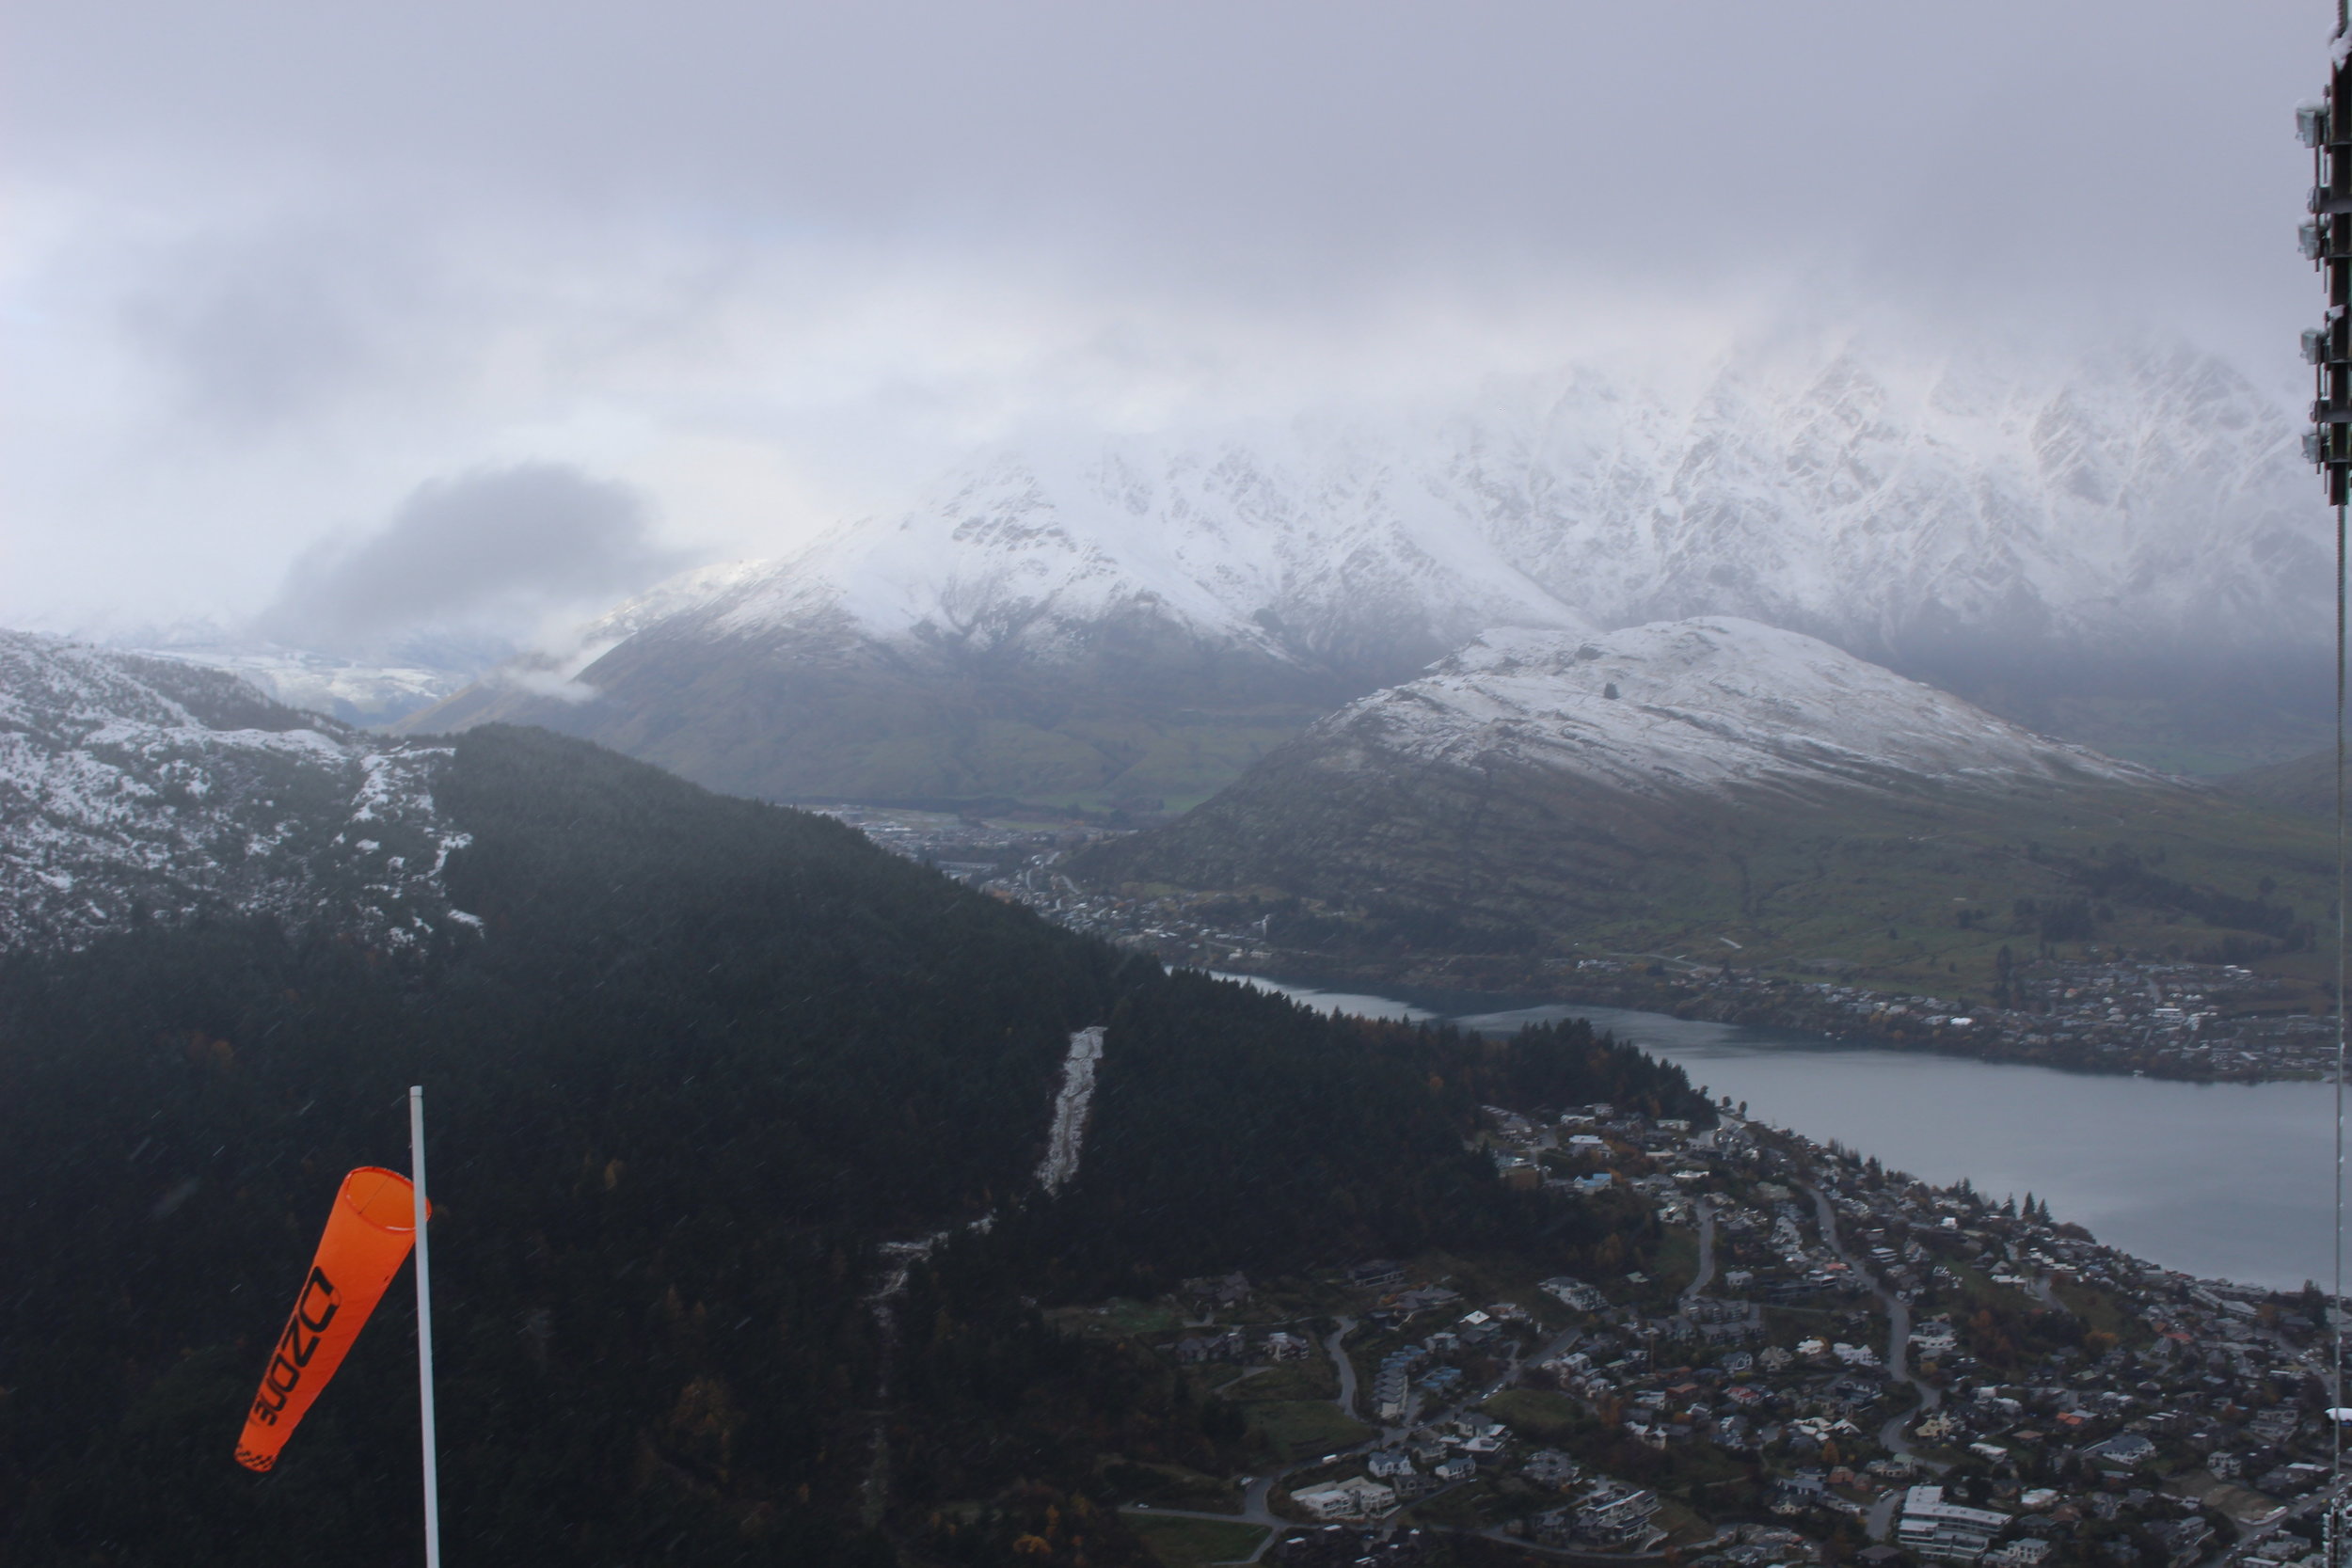  View from the Mountaintop in Queenstown, New Zealand 